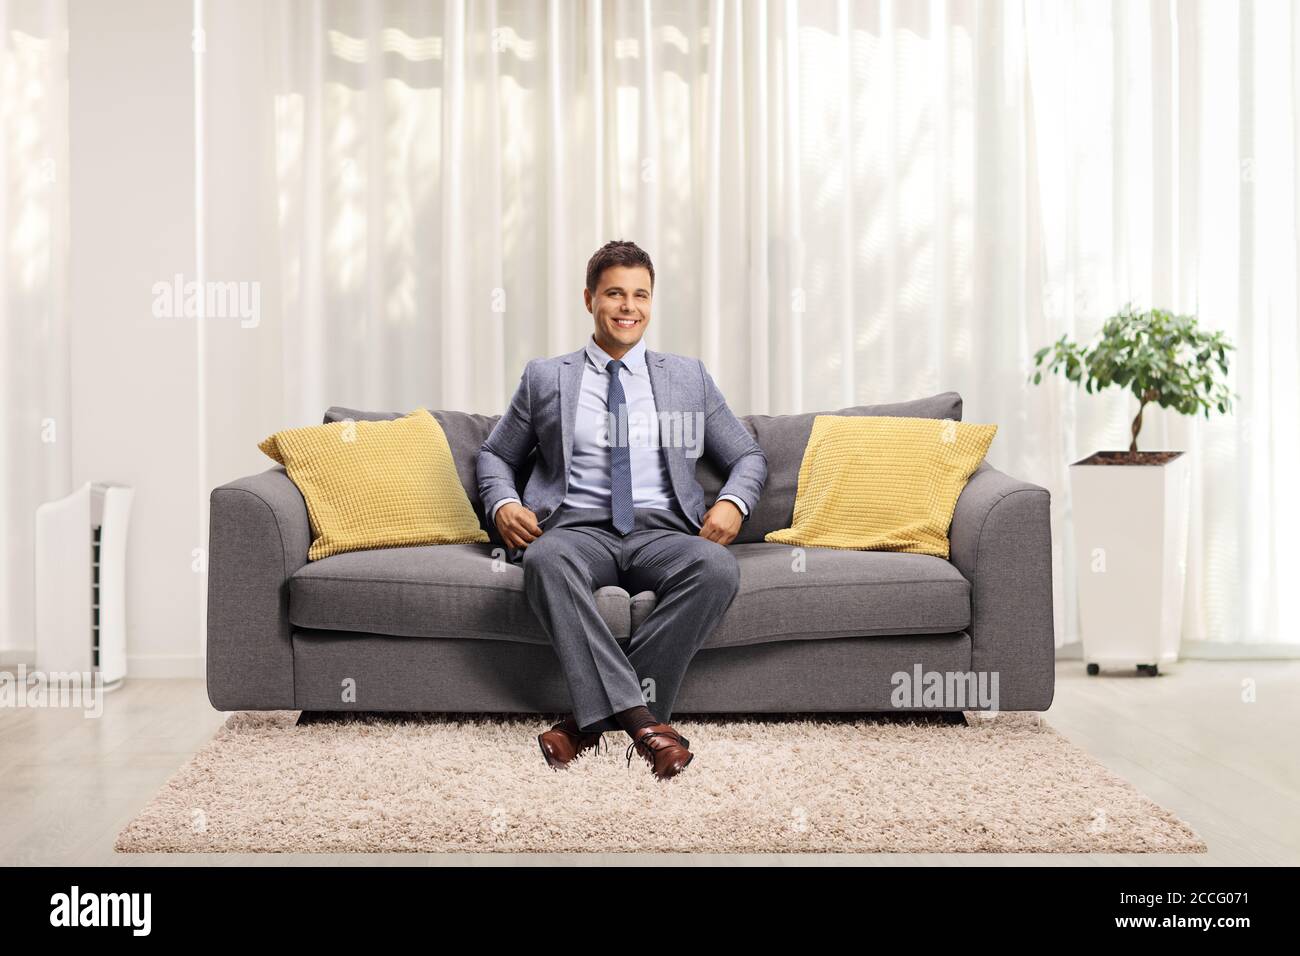 Professional young man sitting on a gray sofa at home and smiling at the camera Stock Photo